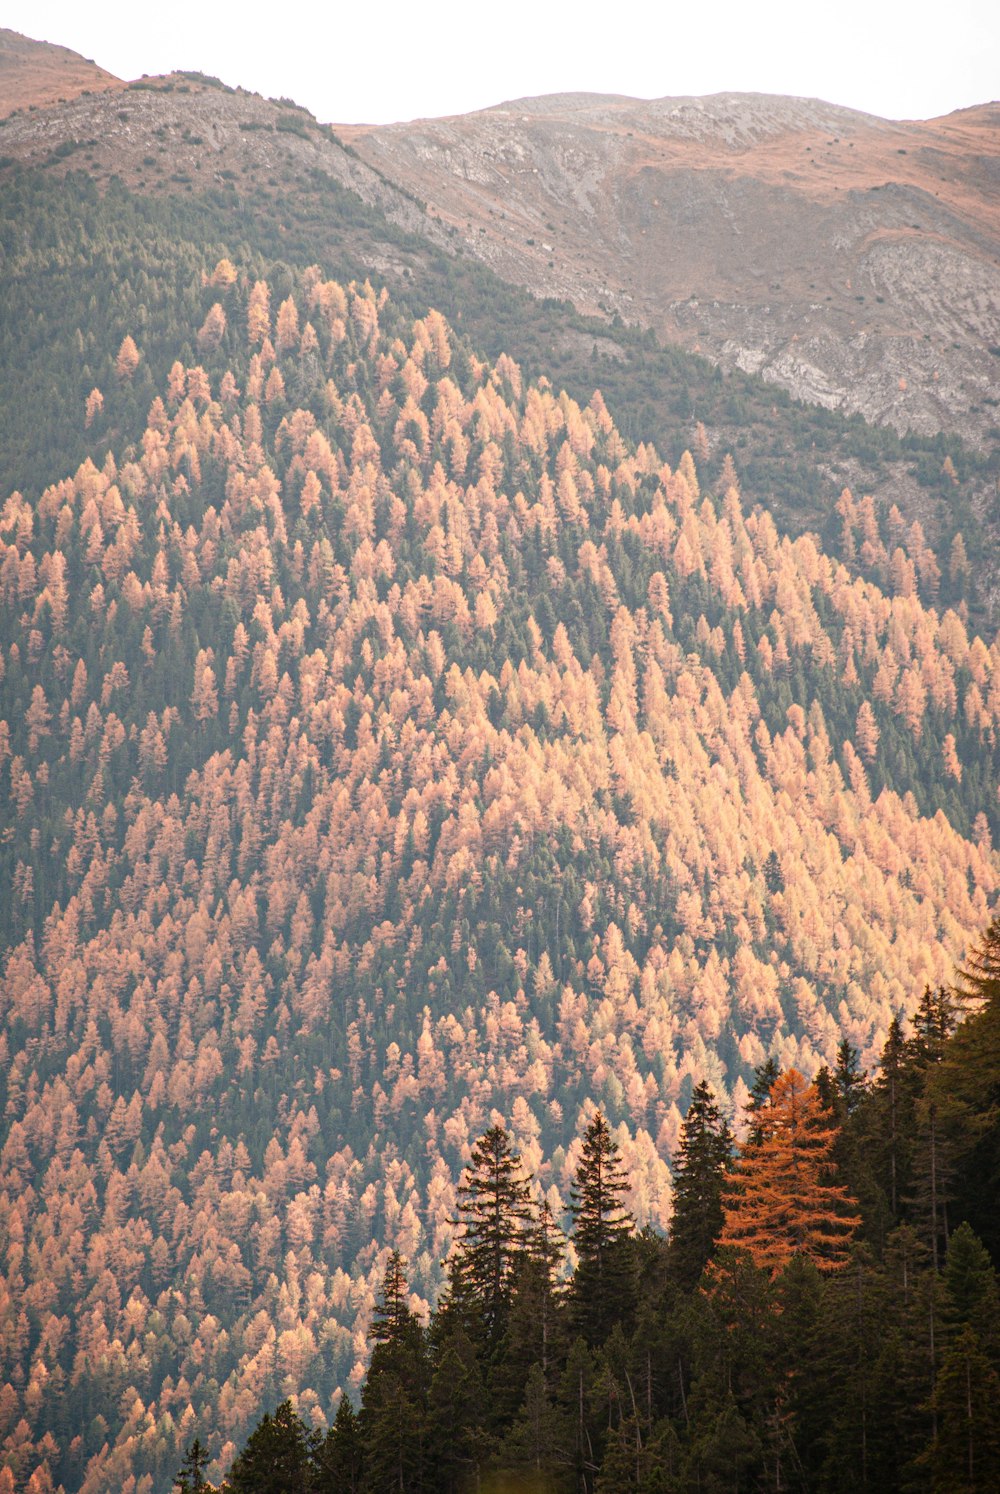 a forest of trees in a mountainous region